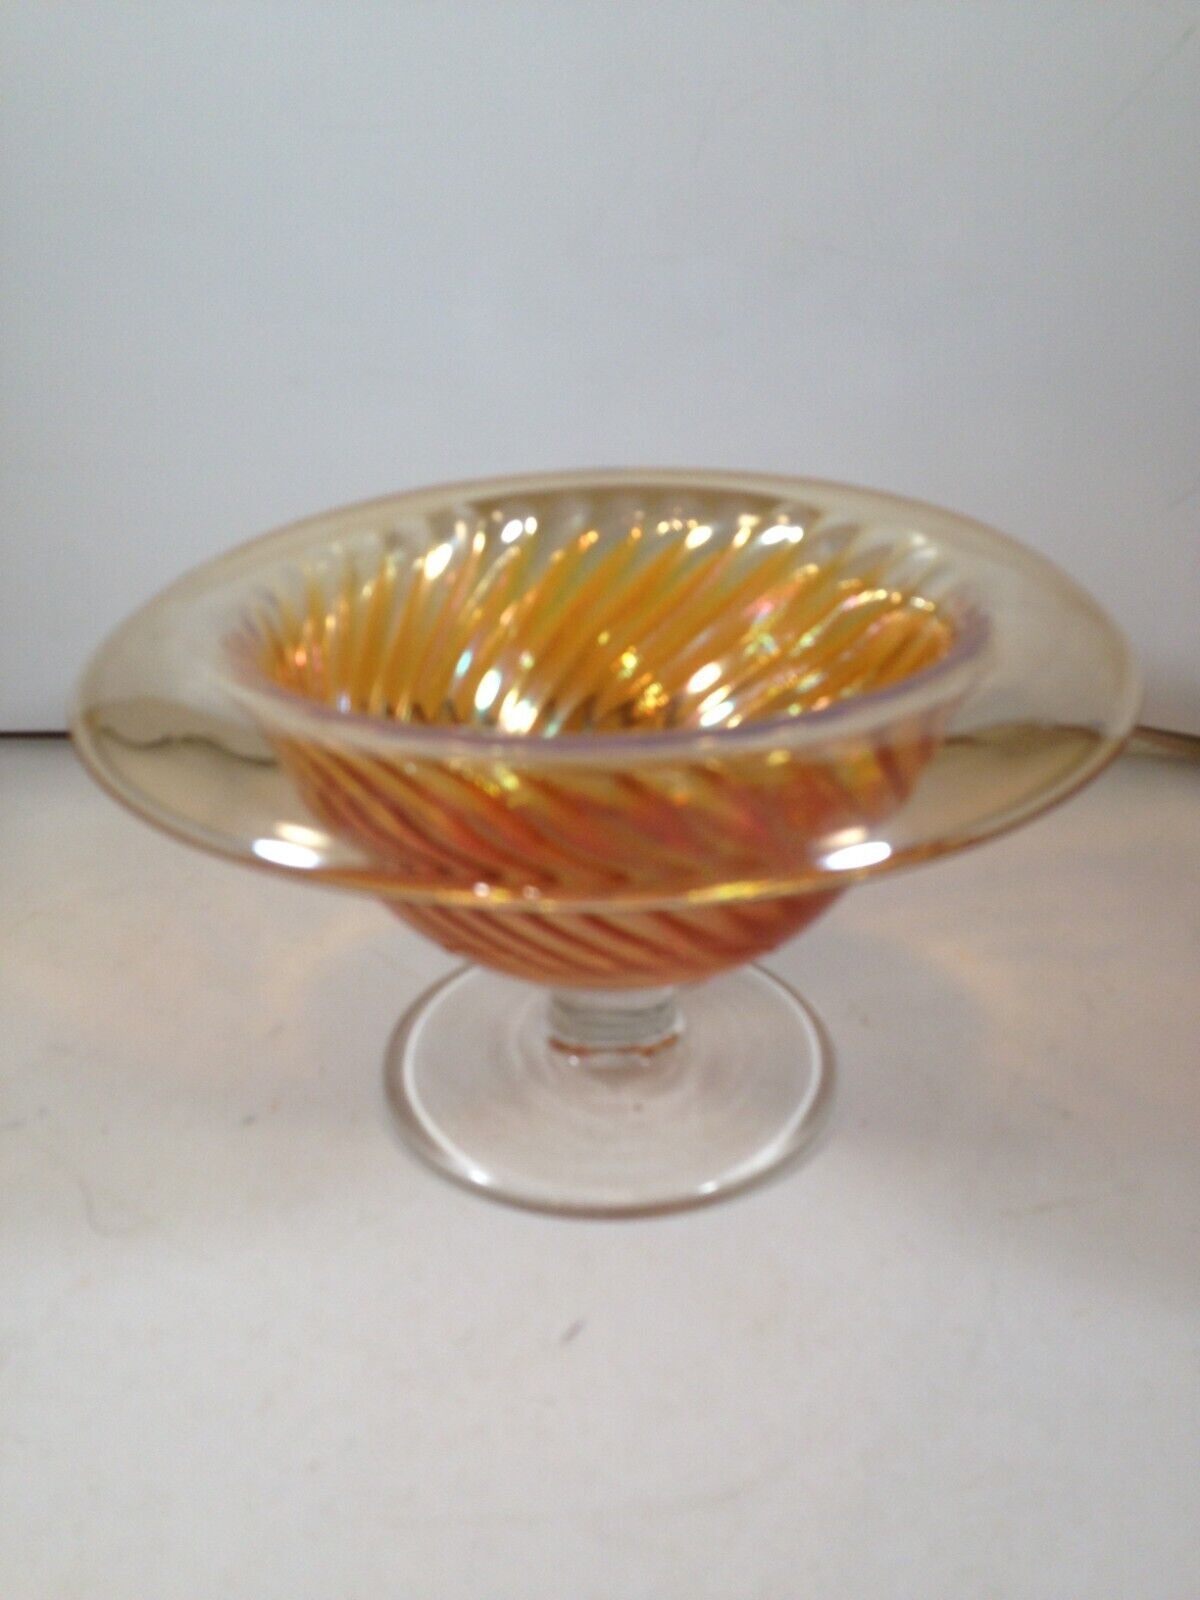 Vintage Marigold Carnival Glass Footed Swirl Bowl 6-1/2” x 3-1/2”